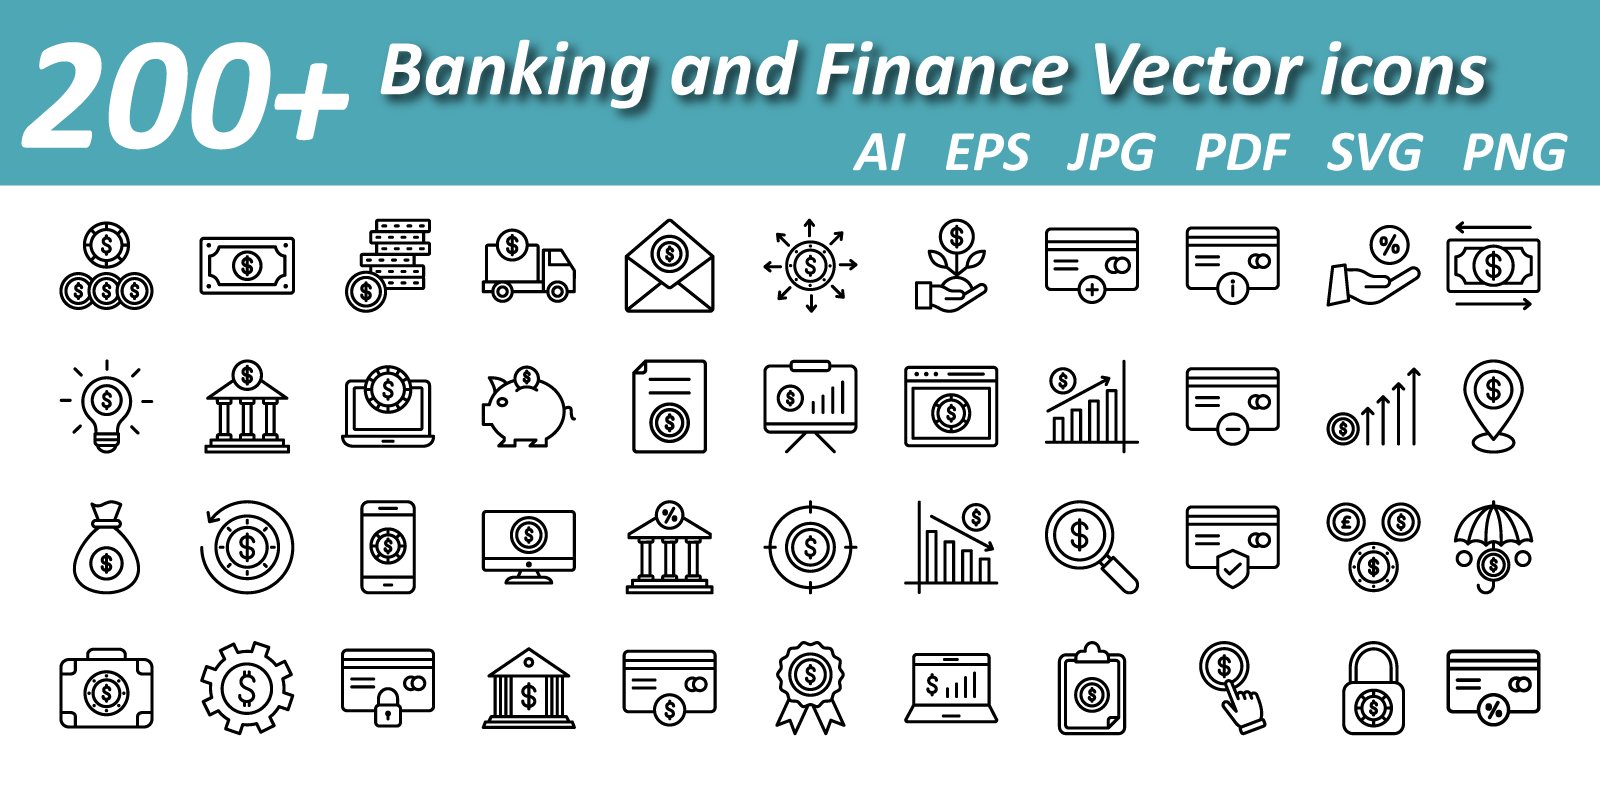 Banking & Finance Vector Icons cover image.